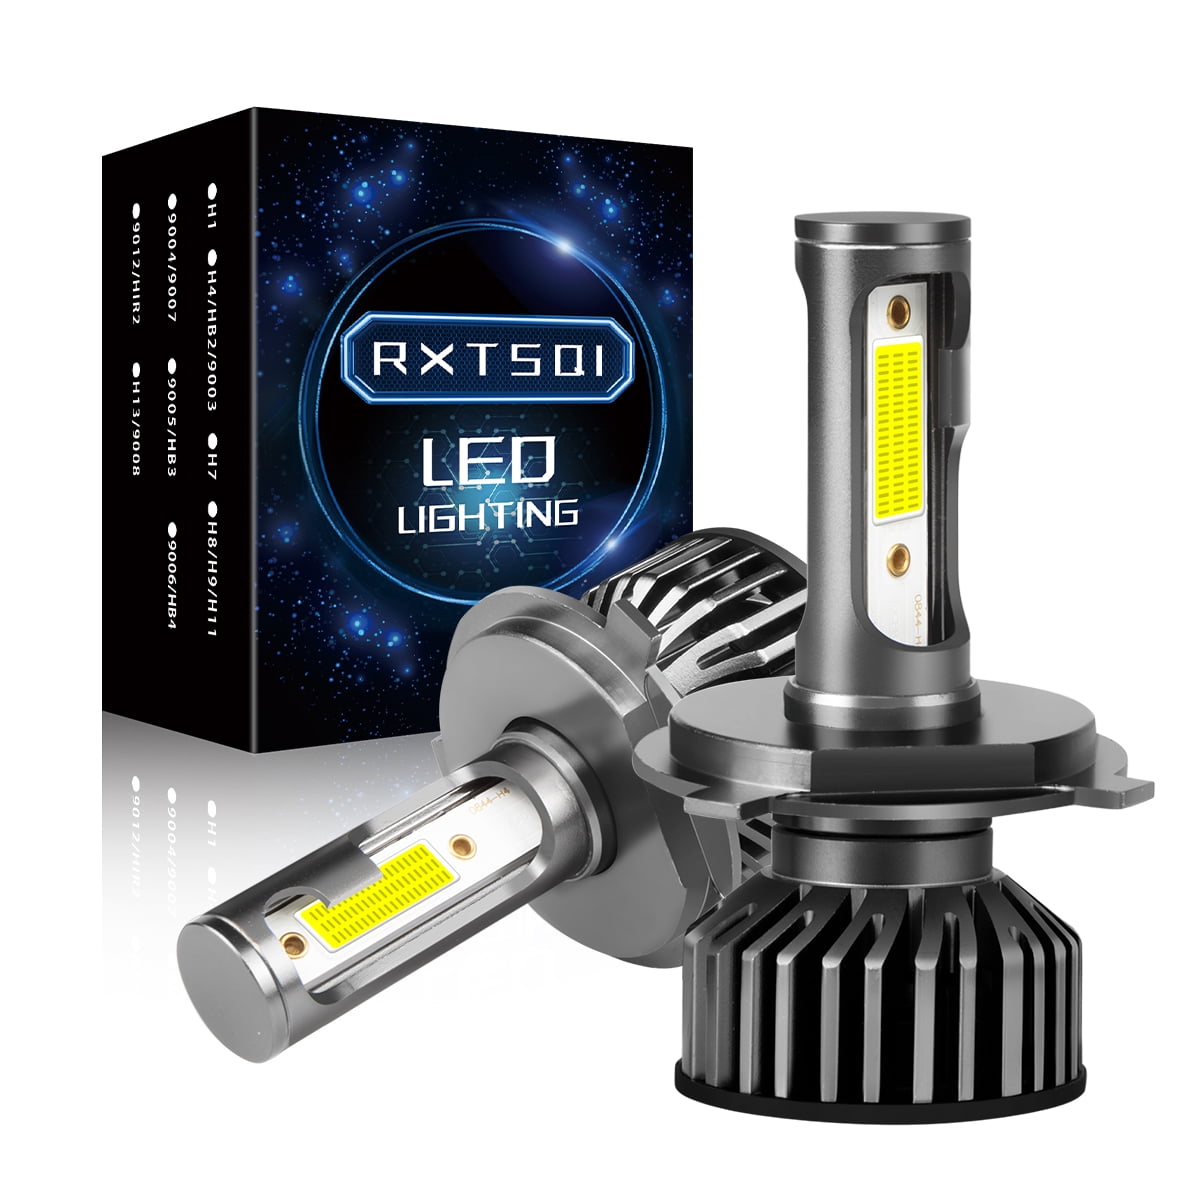 LED Headlight Bulbs Headlight bulb H4 9003 Hi/Low All-in-One Conversion Kit  Led headlights H7 H8 H9 H11 9005 9006 with COB Chips 8000 Lm 6500K Cool  White Beam Bulbs IP68 Waterproof, 